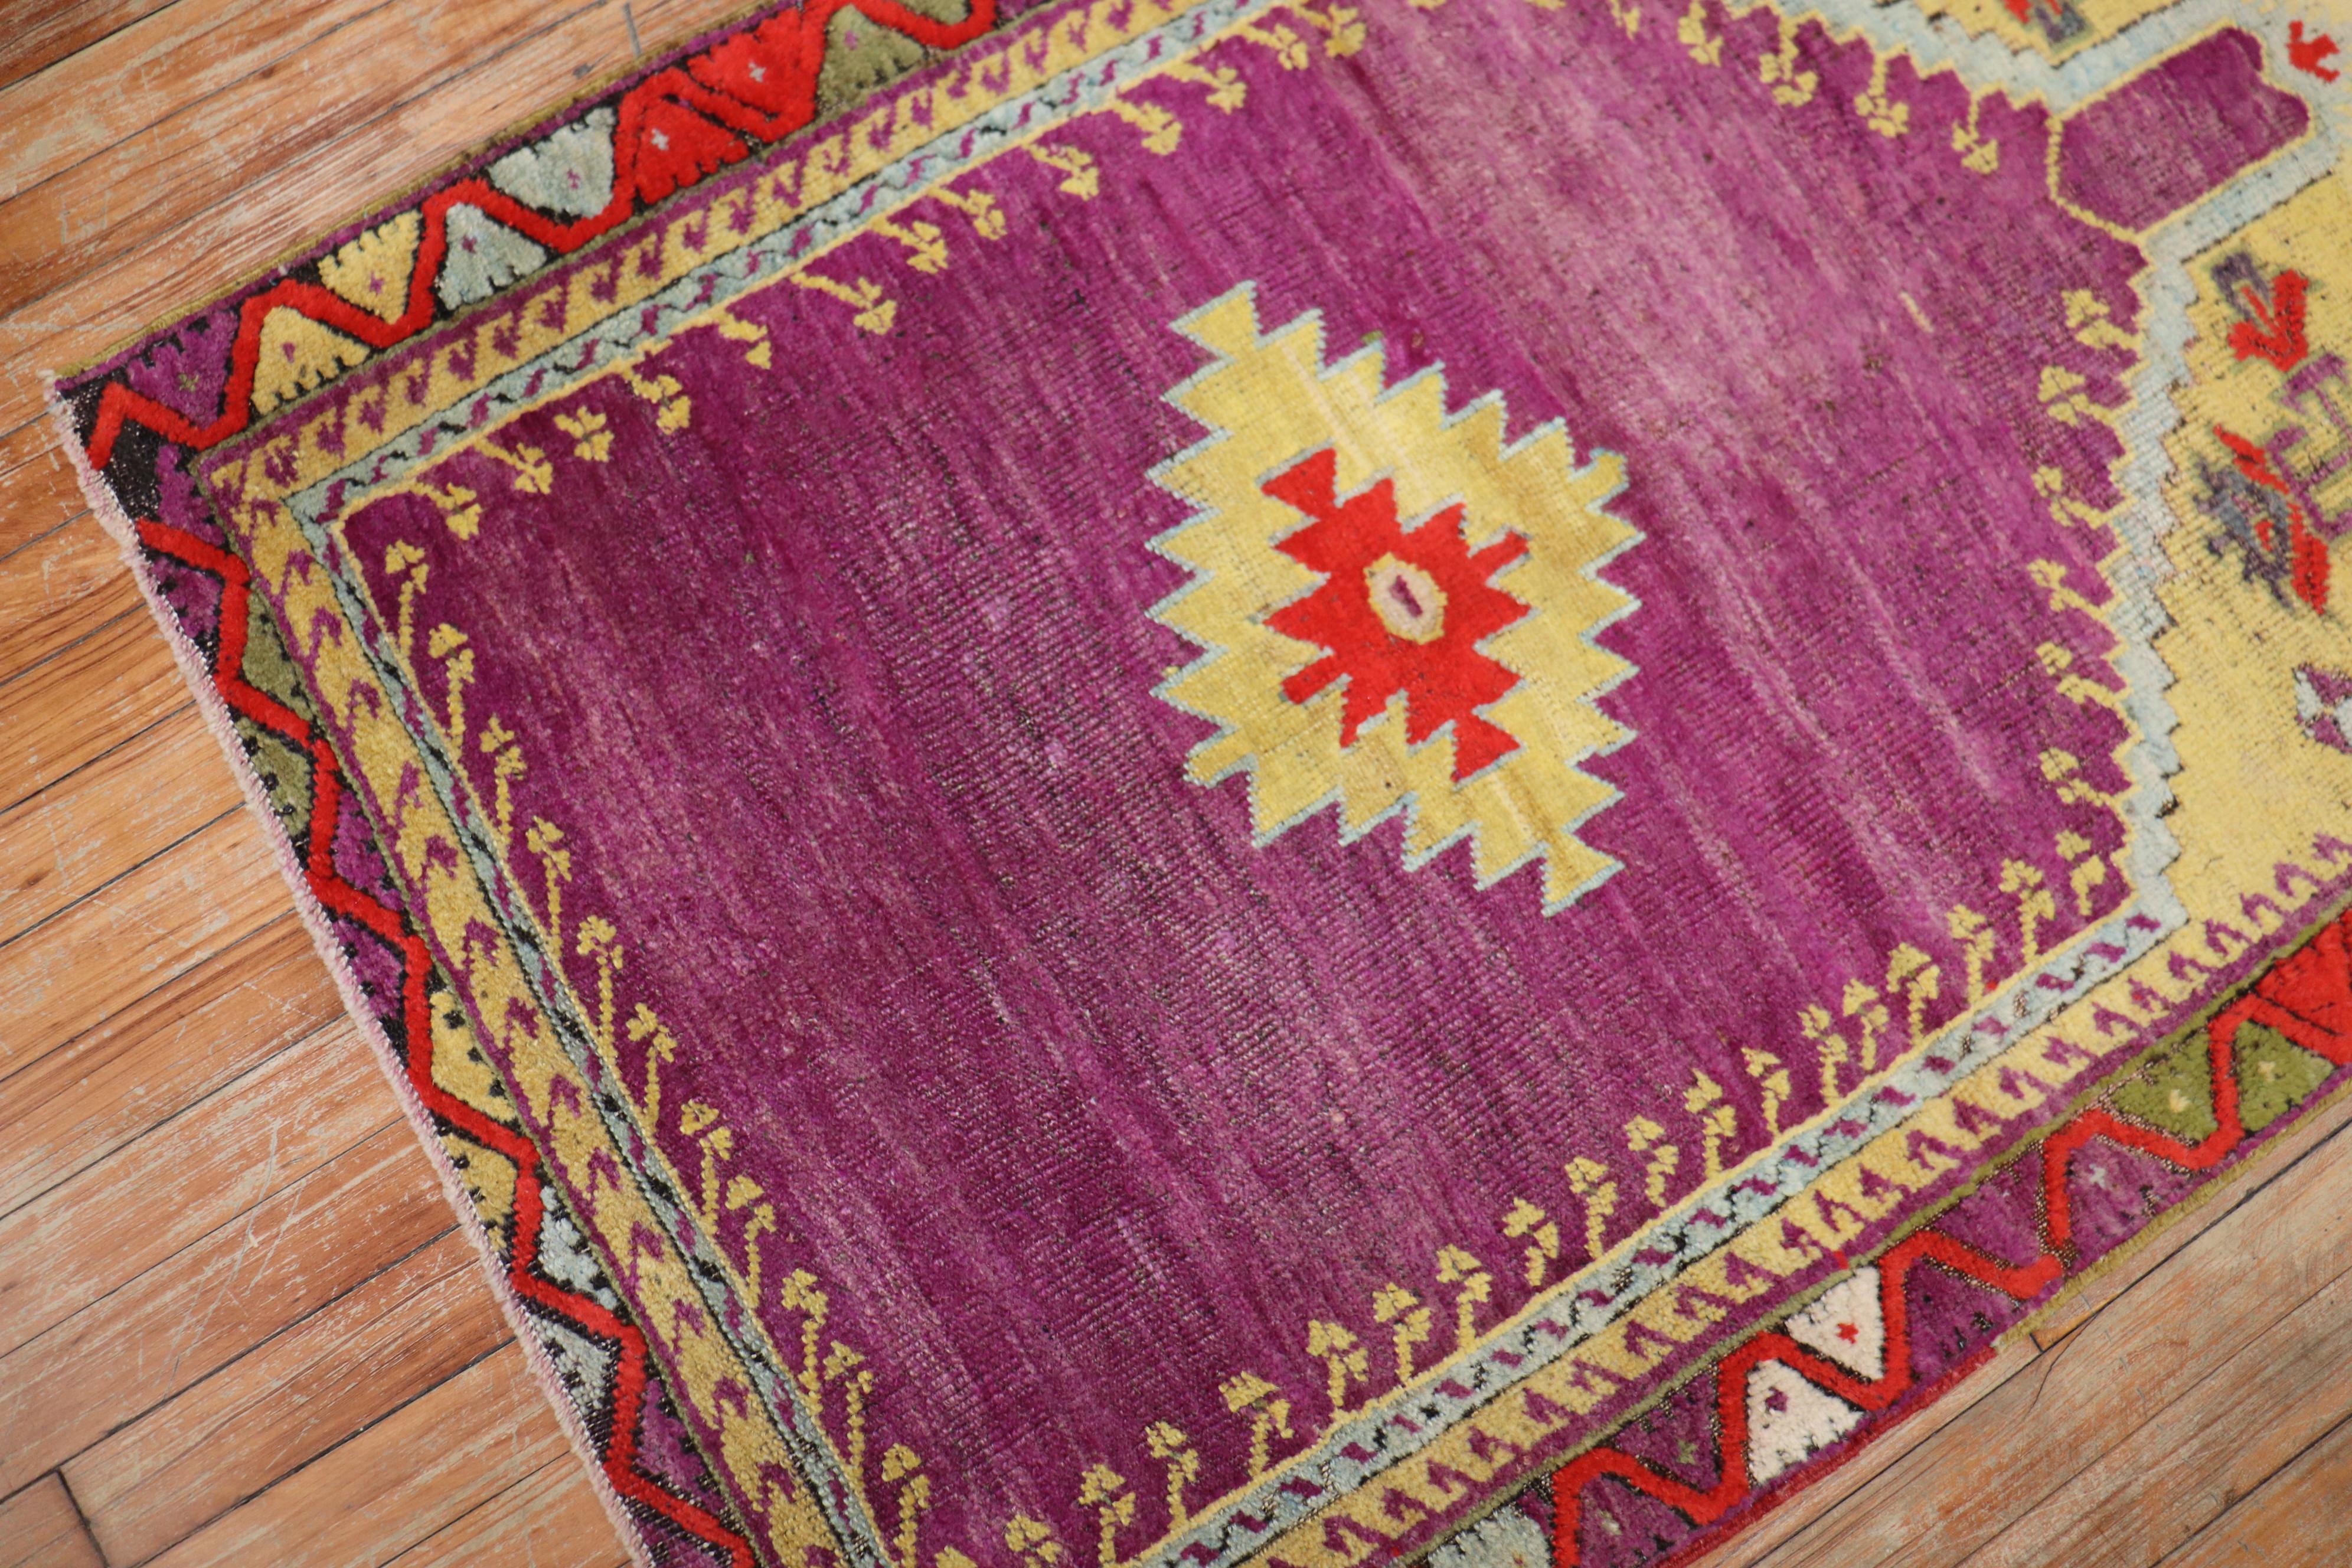 A one of a kind Boutique looking hand knotted scatter size early 20th century Turkish Melas Prayer Niche Rug. The field is a deep purple/violet color. Havent seen many in this color palette. Its light enough to be used as wall decoration